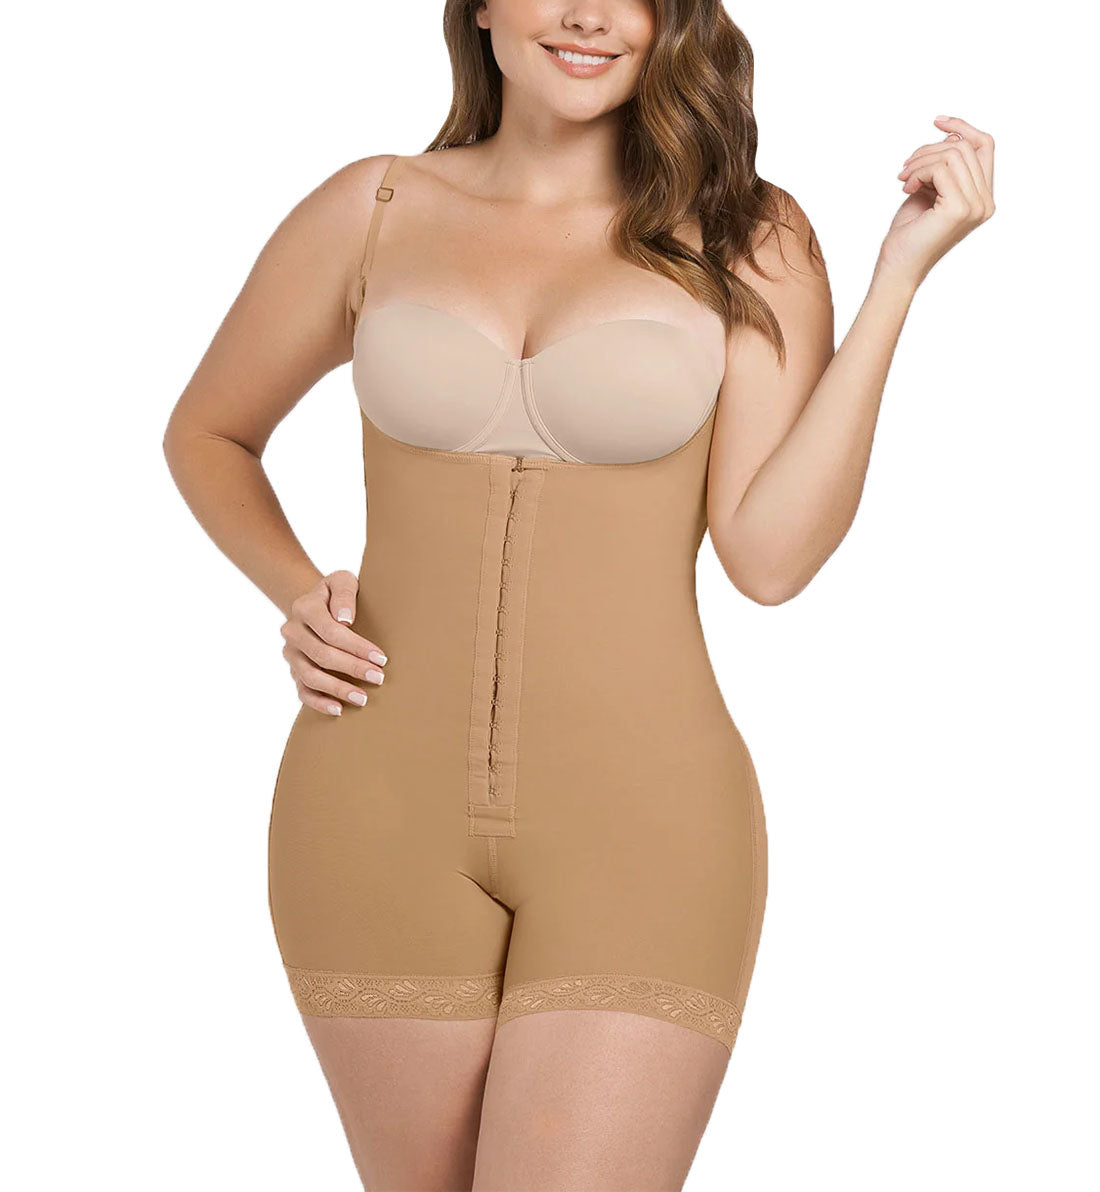 Leonisa Firm Compression Shaper with Boyshort Butt Lifter (018491)- Beige